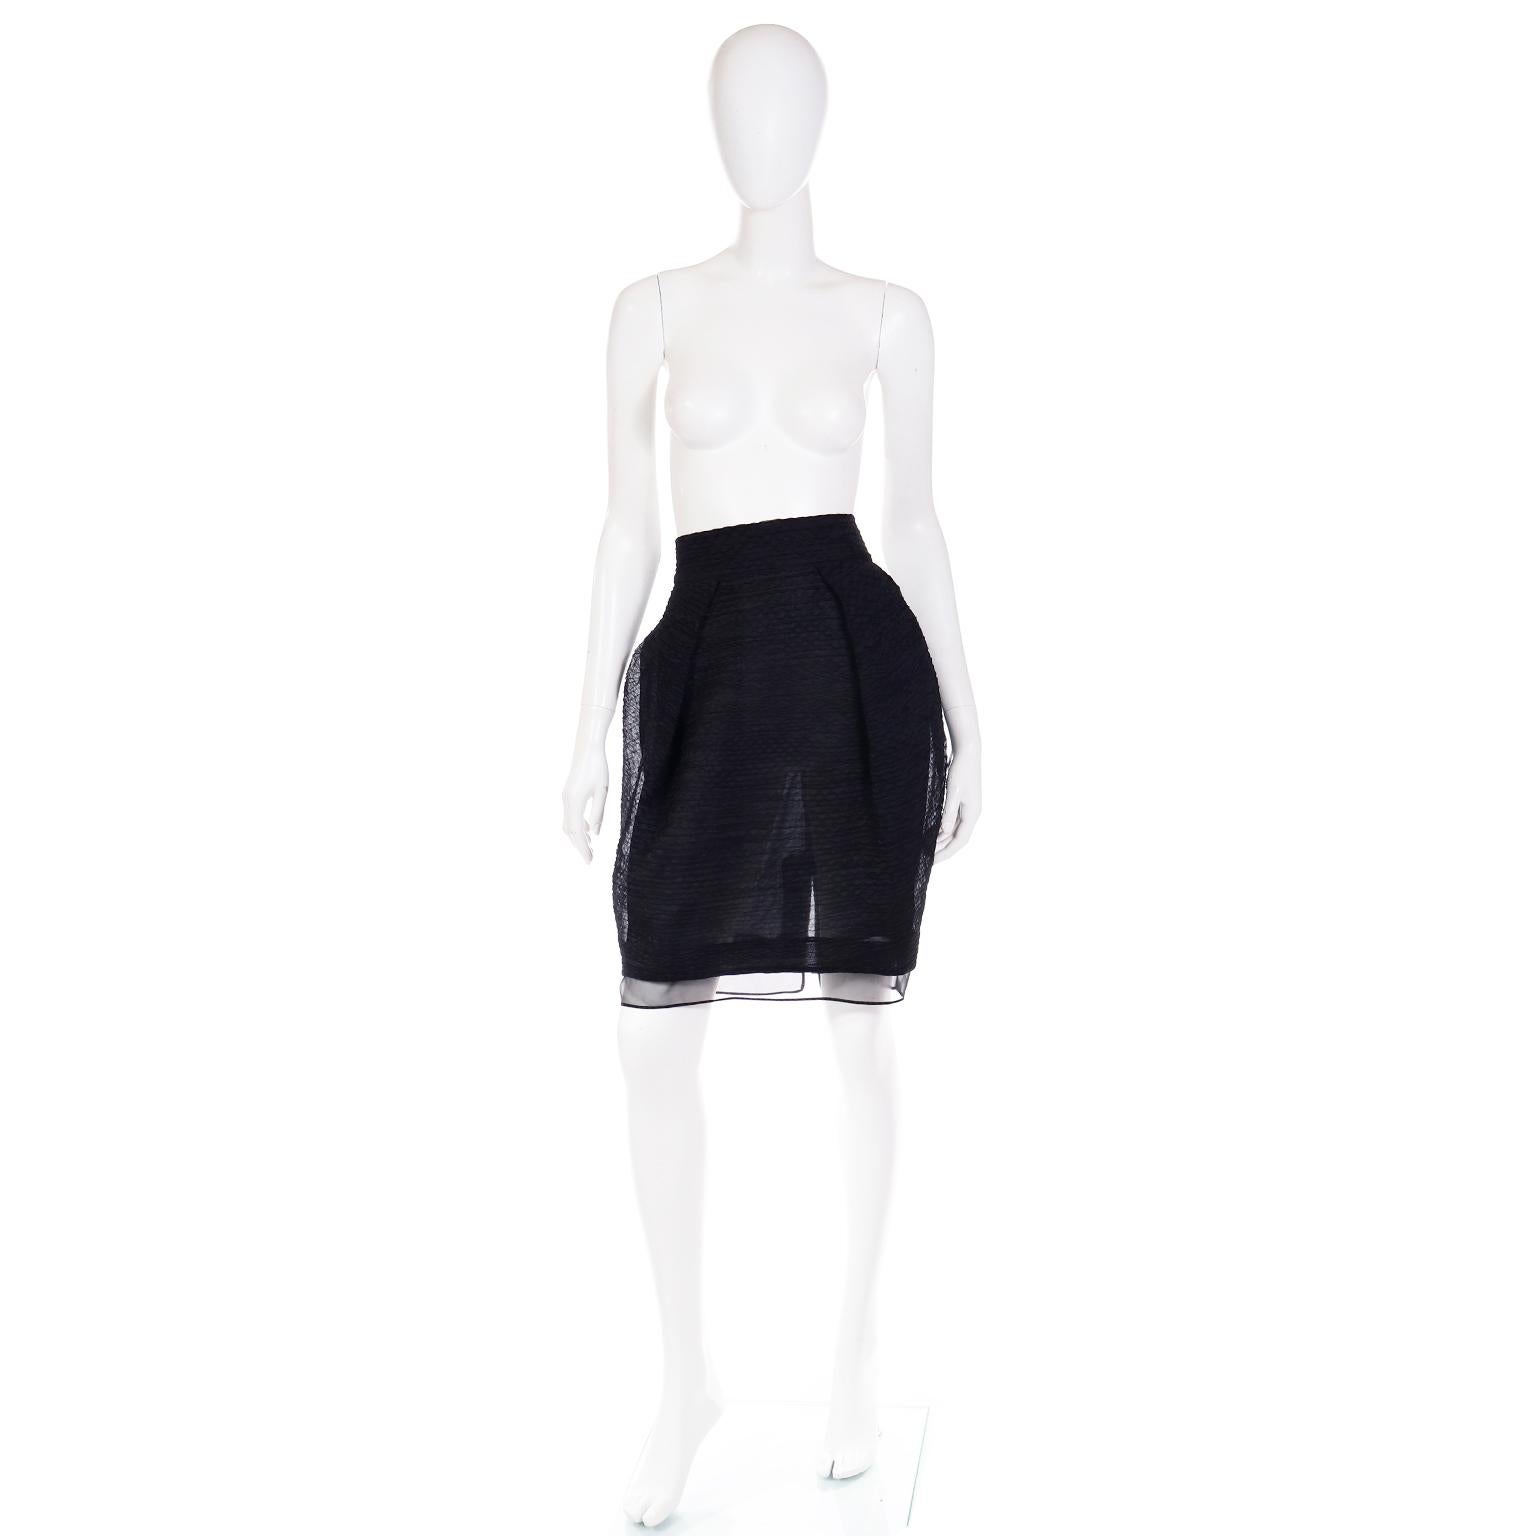 This is an incredible vintage Gianfranco Ferre black evening skirt that was never worn and still has its original tags attached. This high waisted feather light skirt has a slight bubble silhouette and is made in a luxe silk crinkle fabric with a